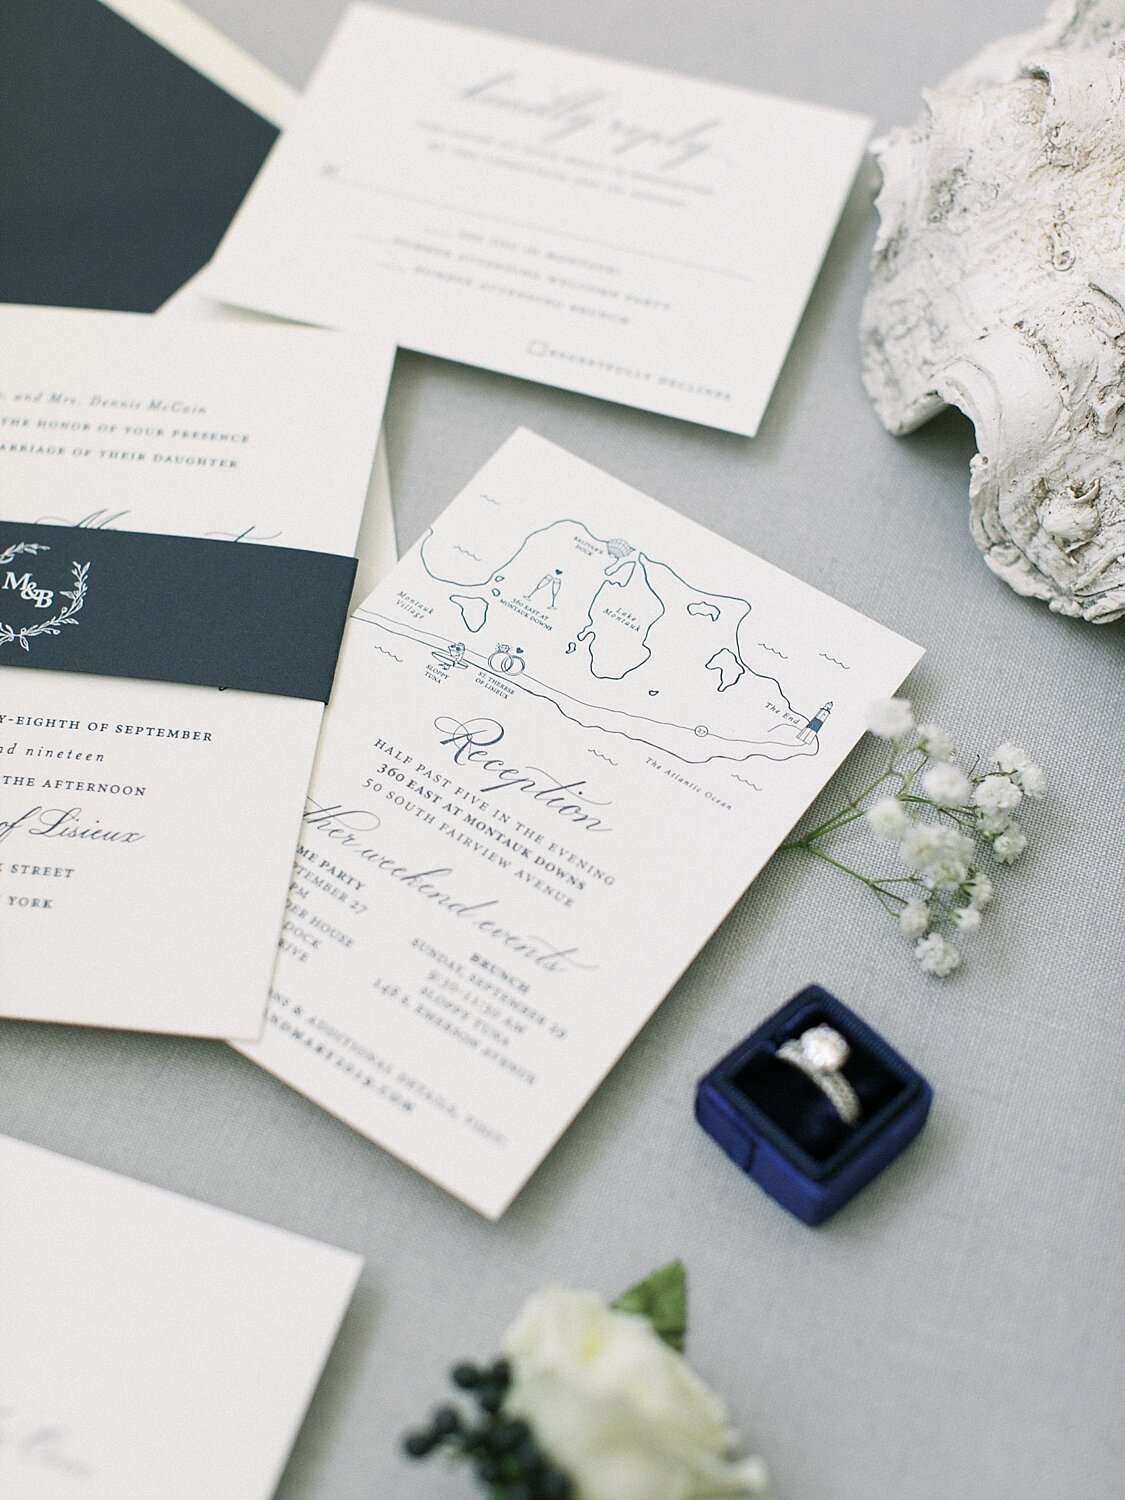 Elegant wedding suite by The Paper Studio photographed by Asher Gardner Photography